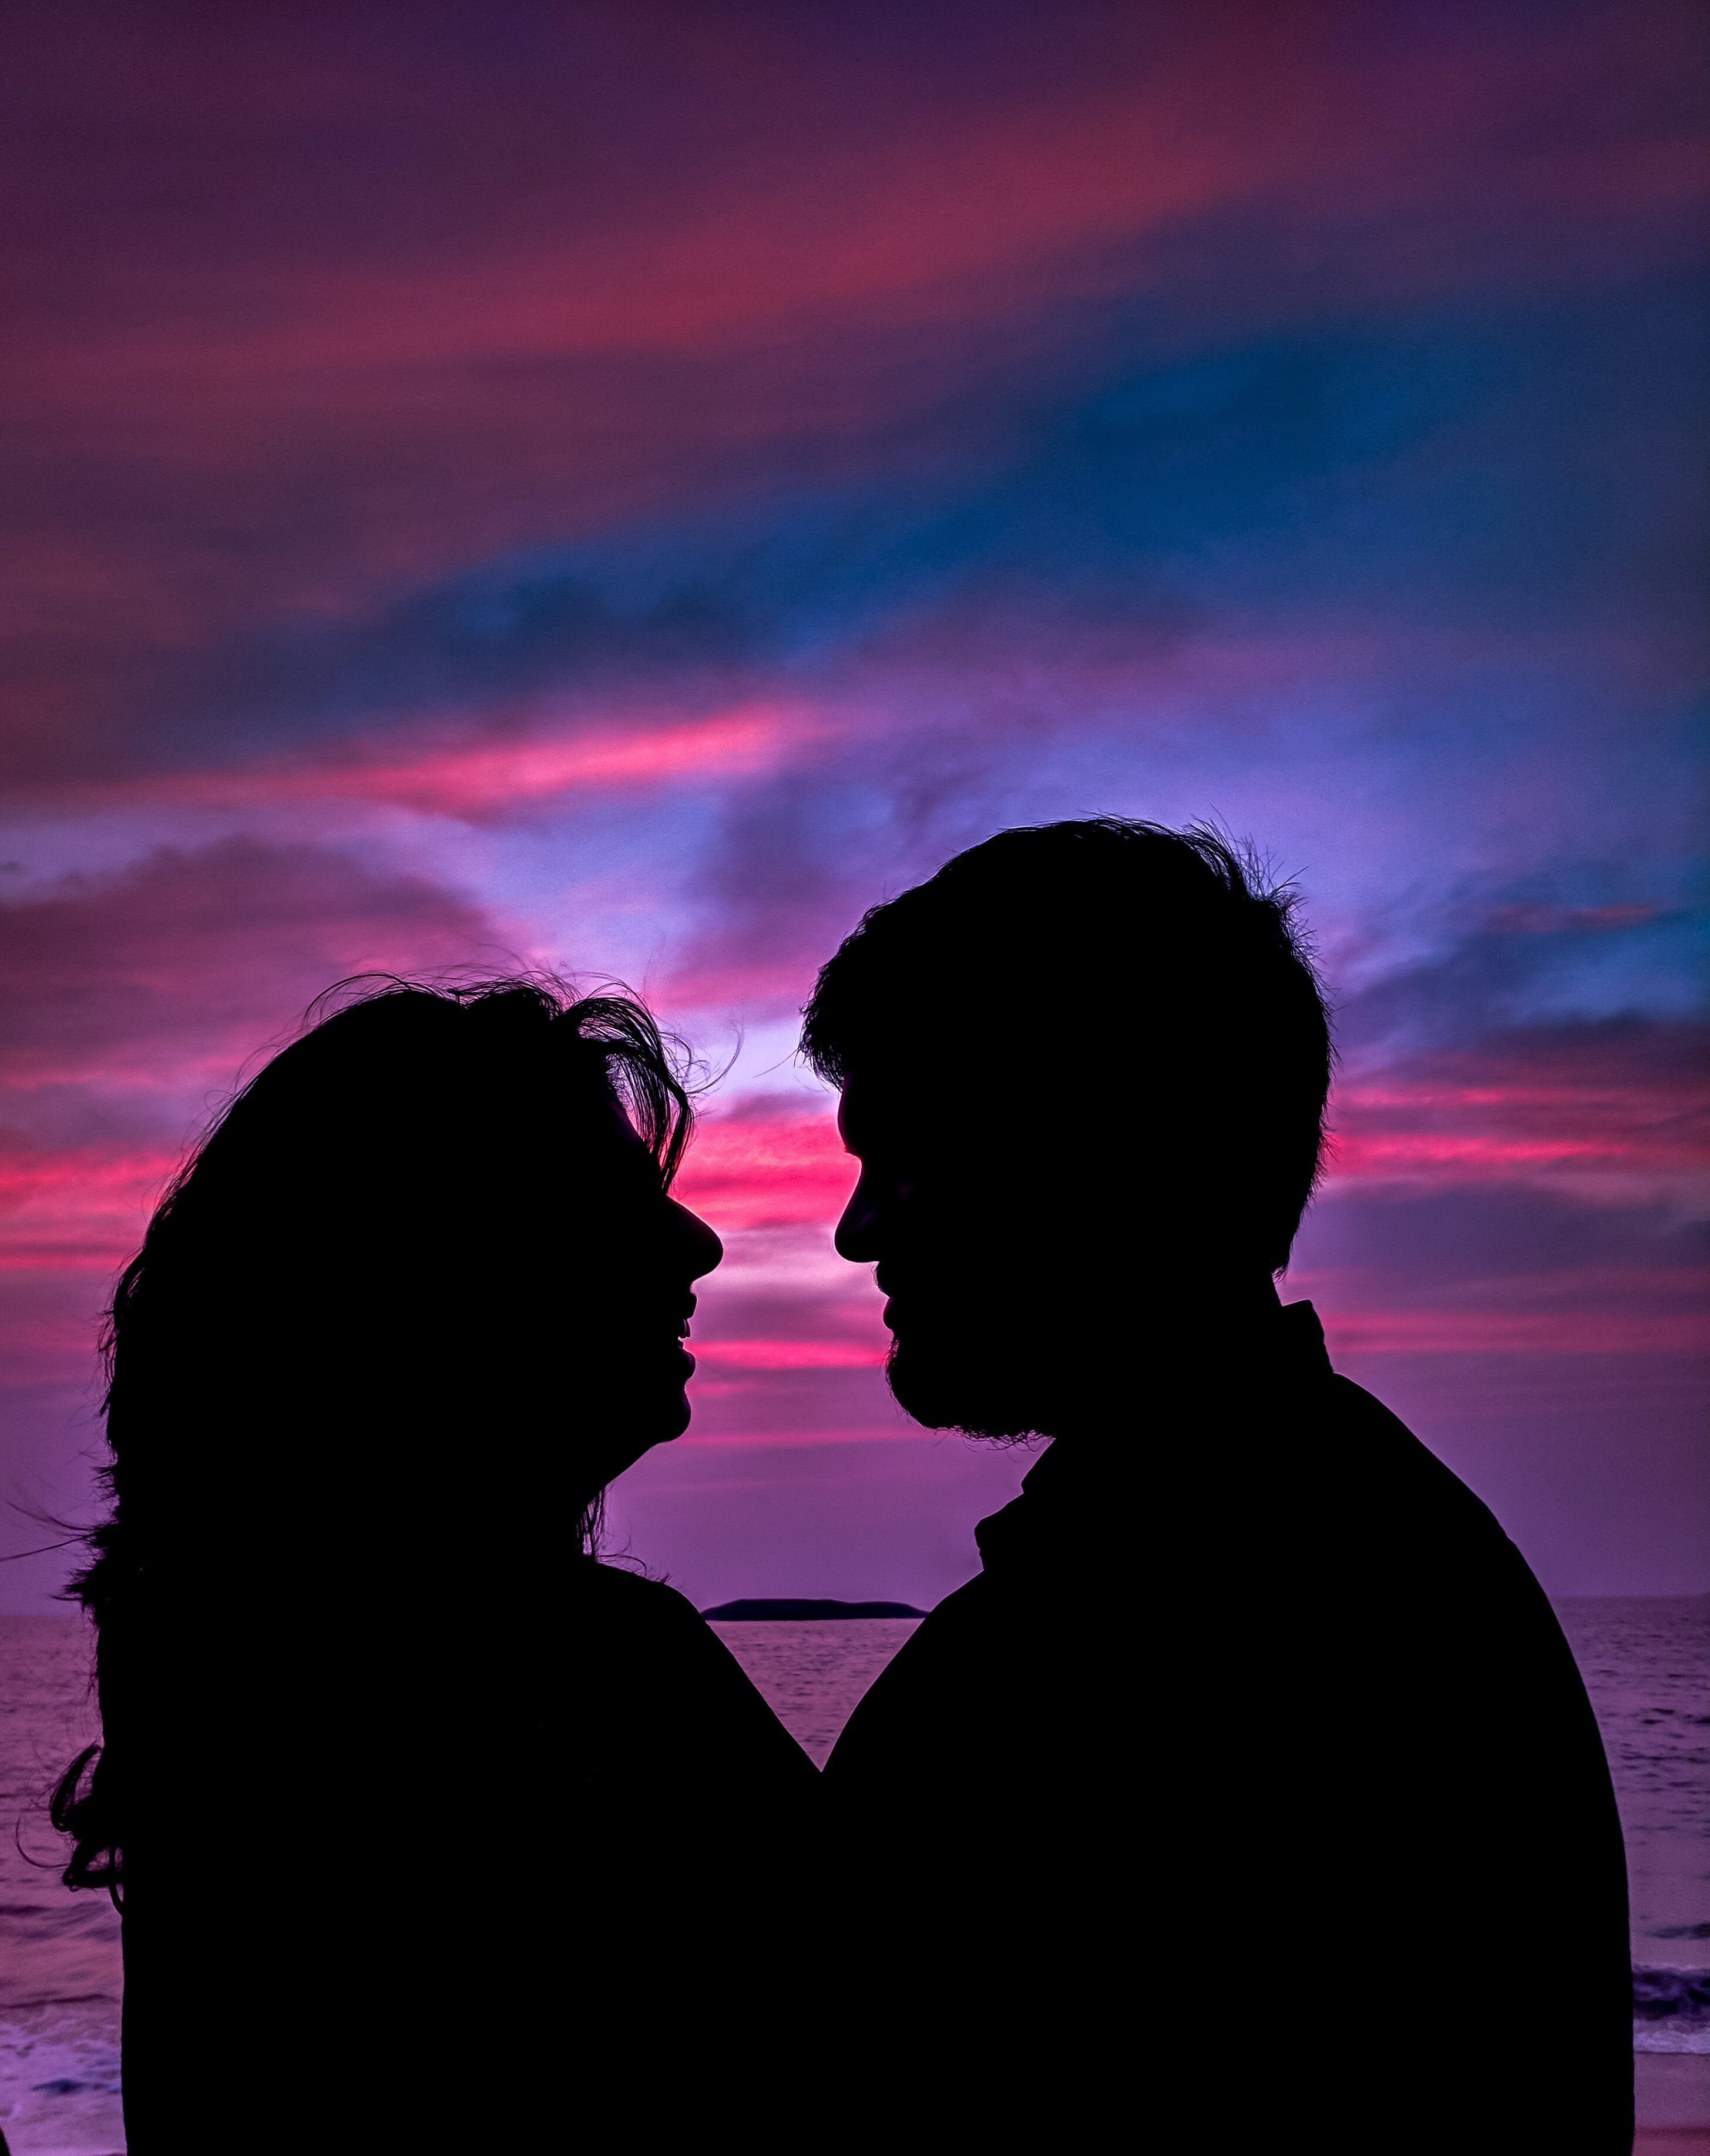 Variants for Silhouette of Couple Facing Each Other.